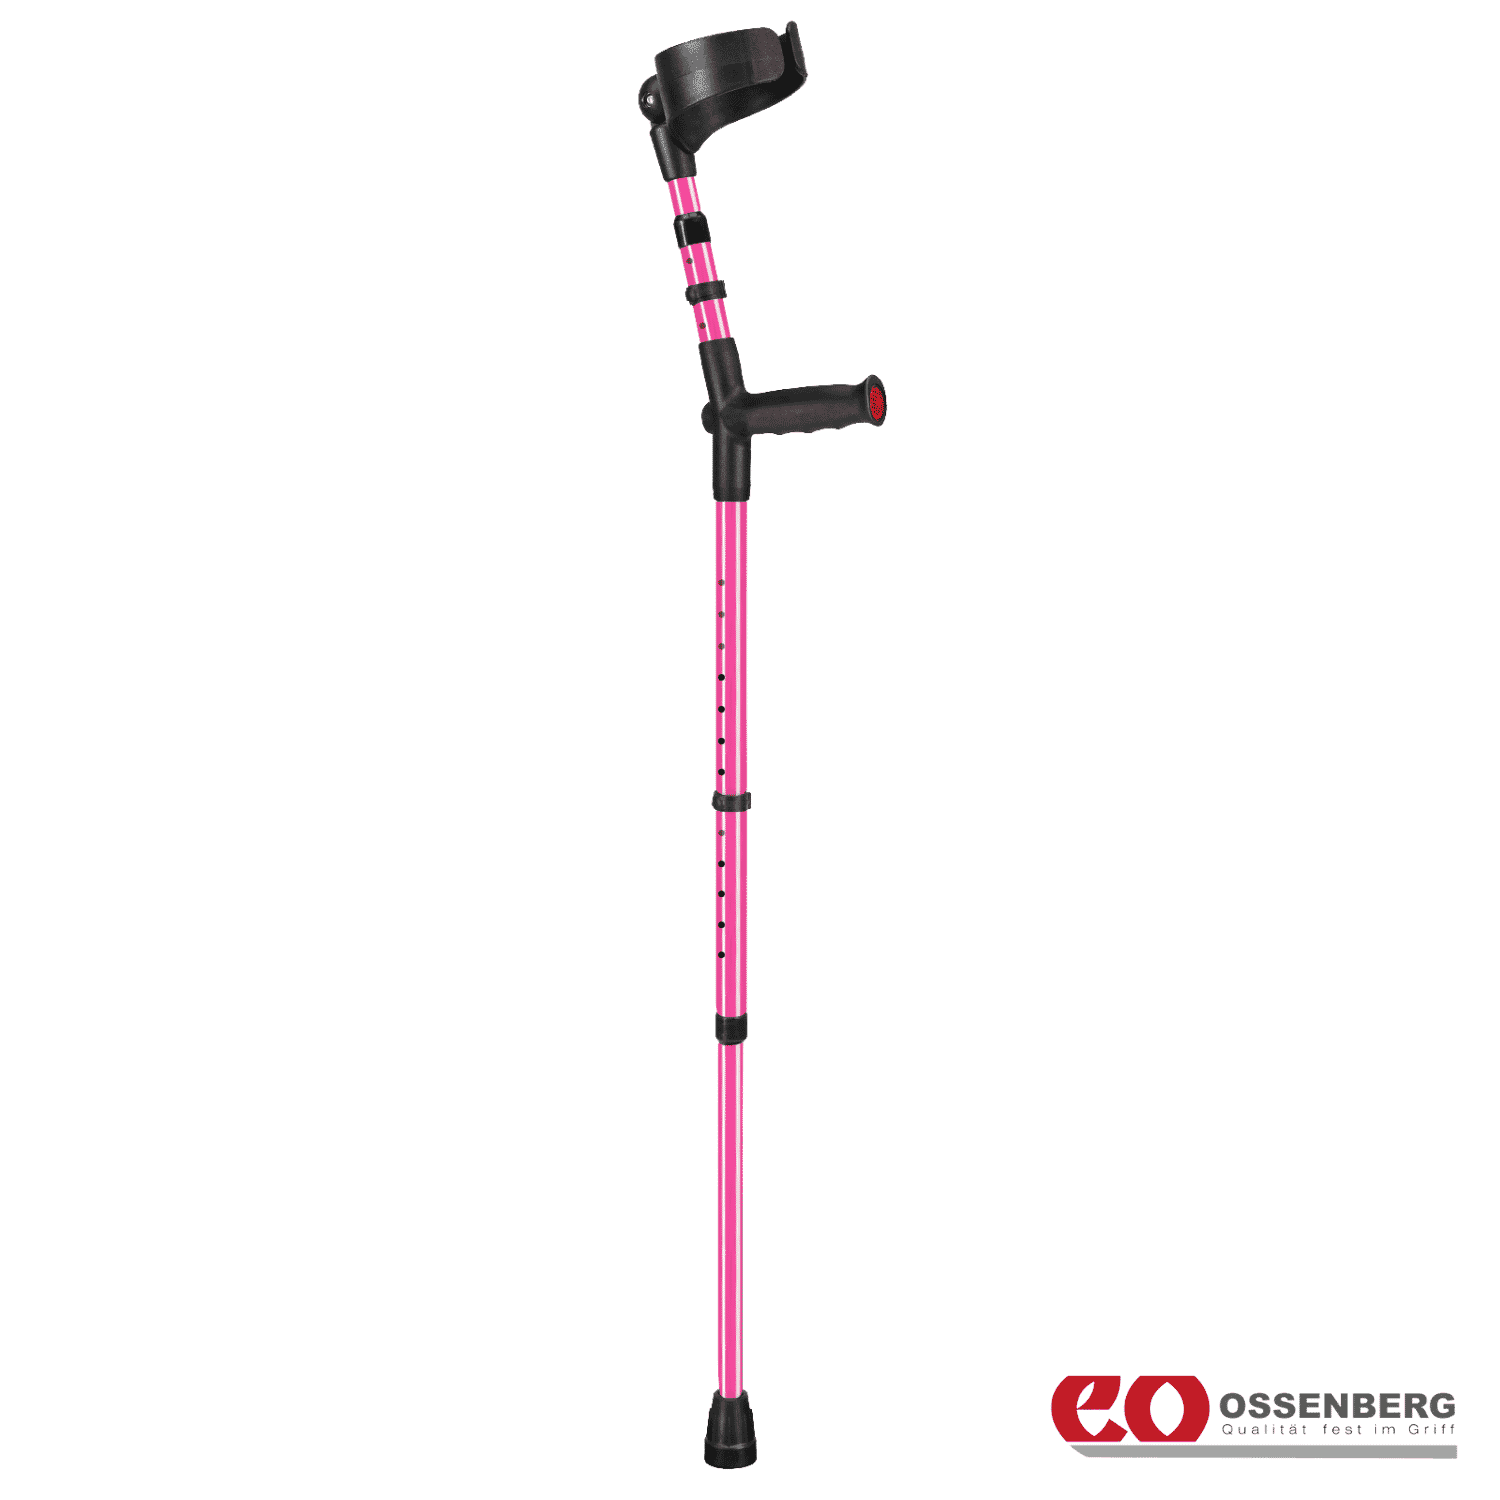 View Ossenberg Soft Grip Double Adjustable Crutches Pink Single information